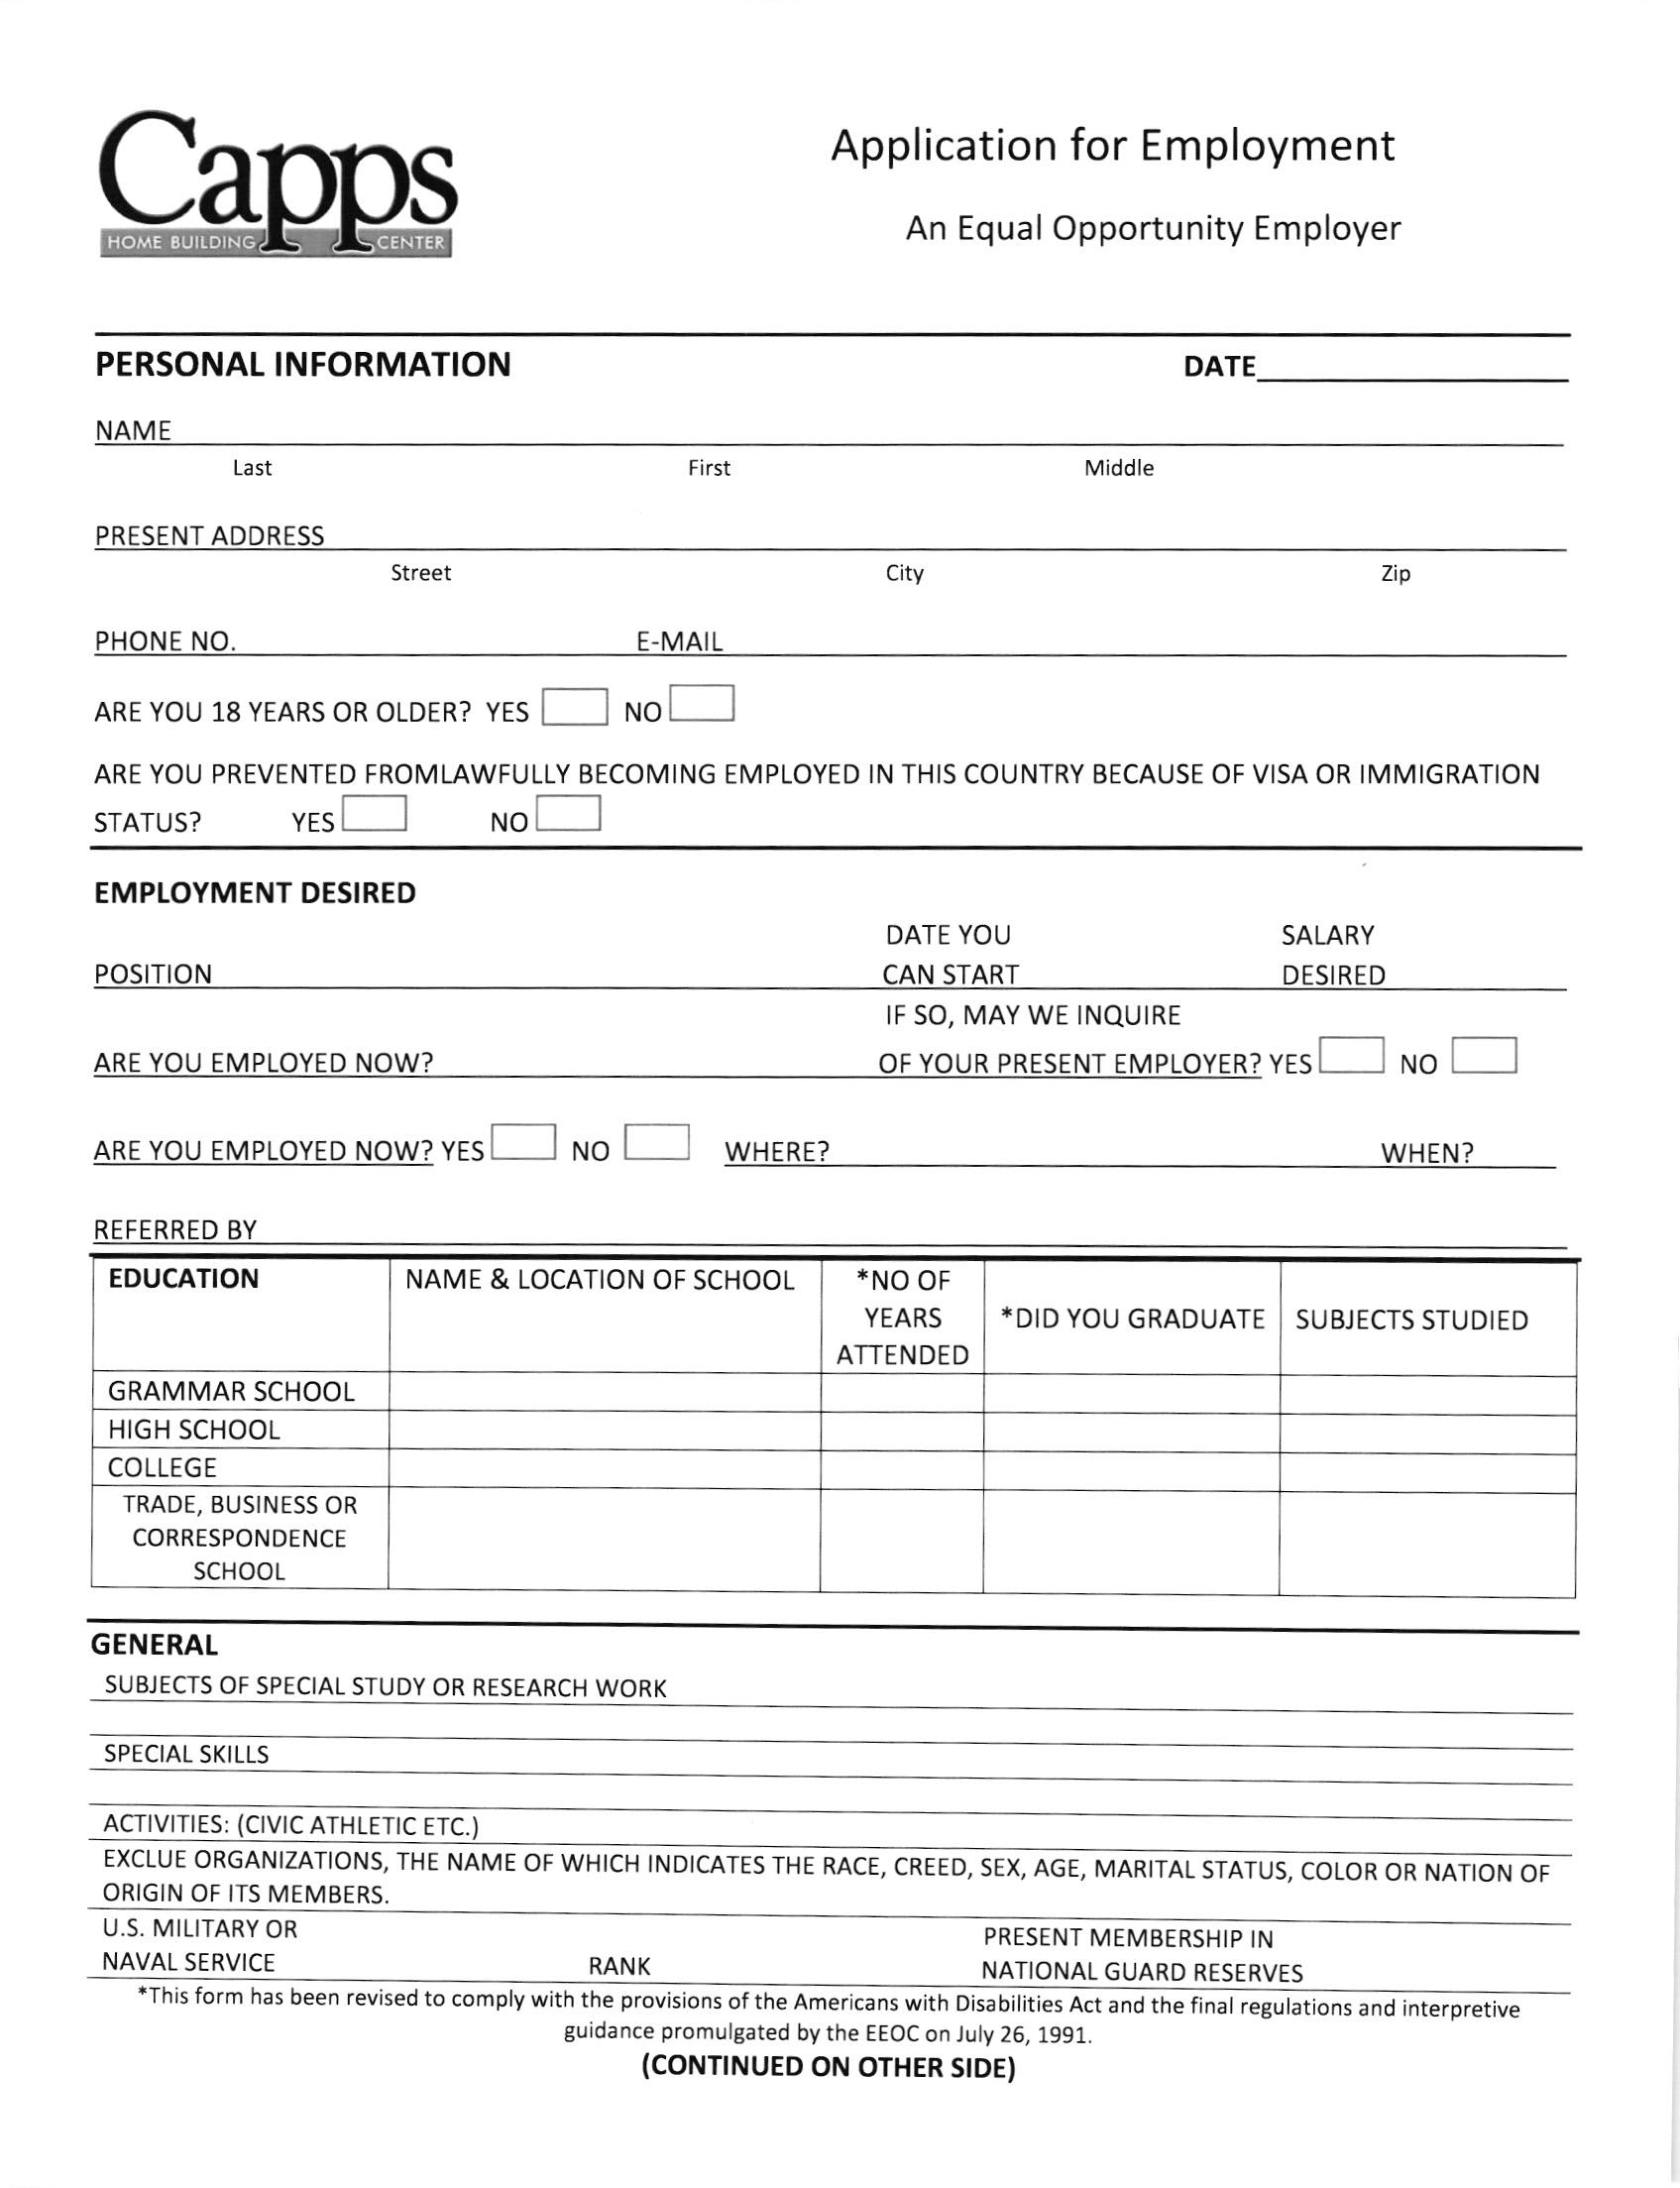 Employment Application Capps Home Building Center 2993